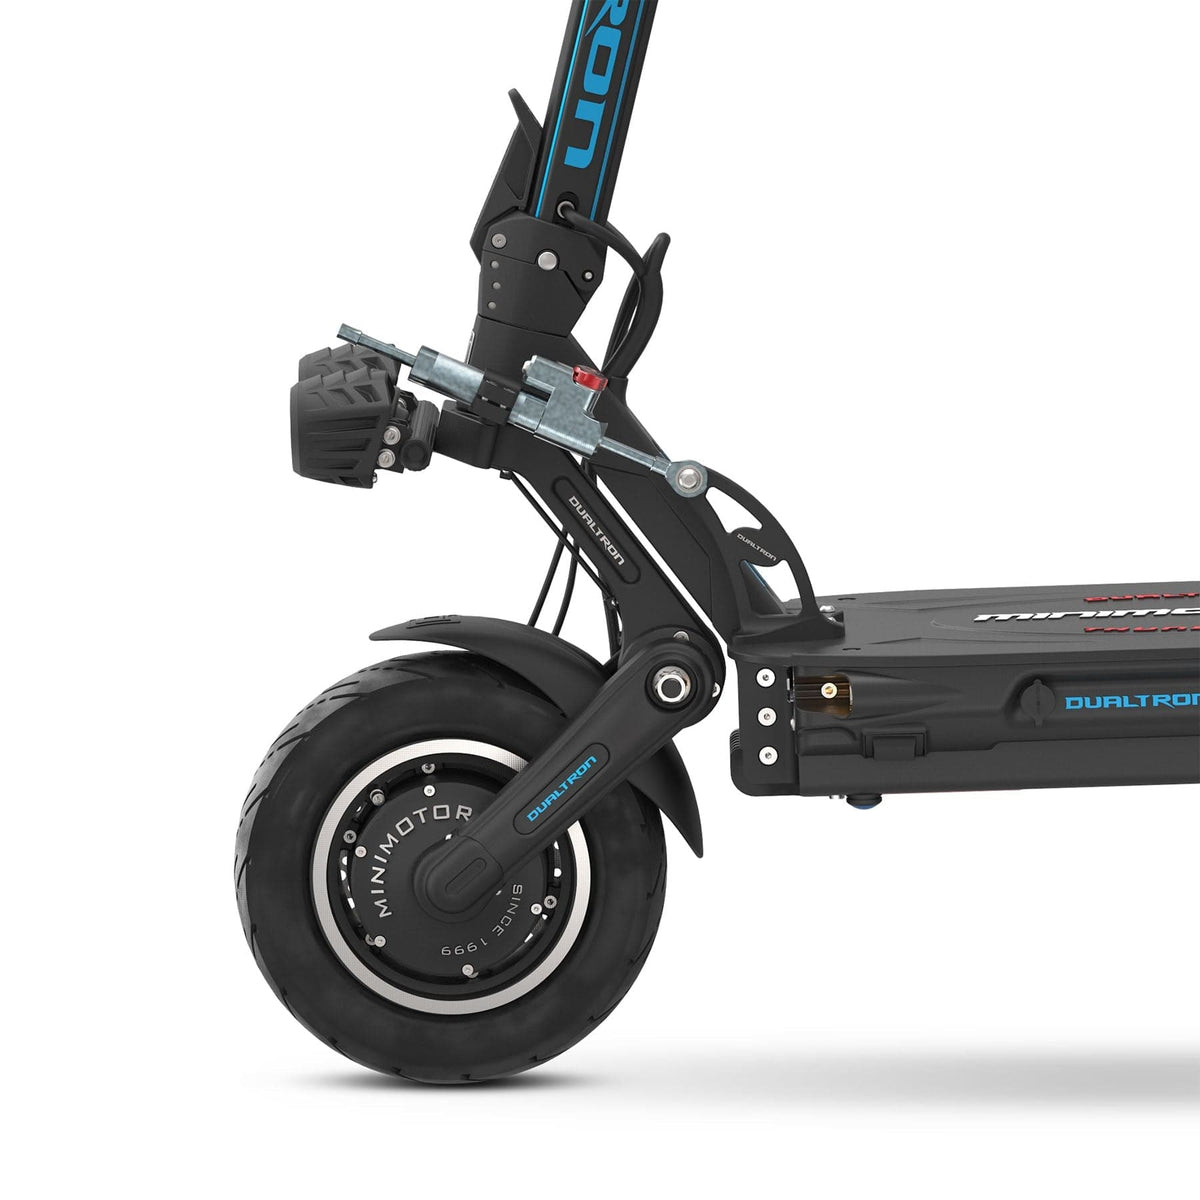 Dualtron Thunder 3 Electric Scooter foldable